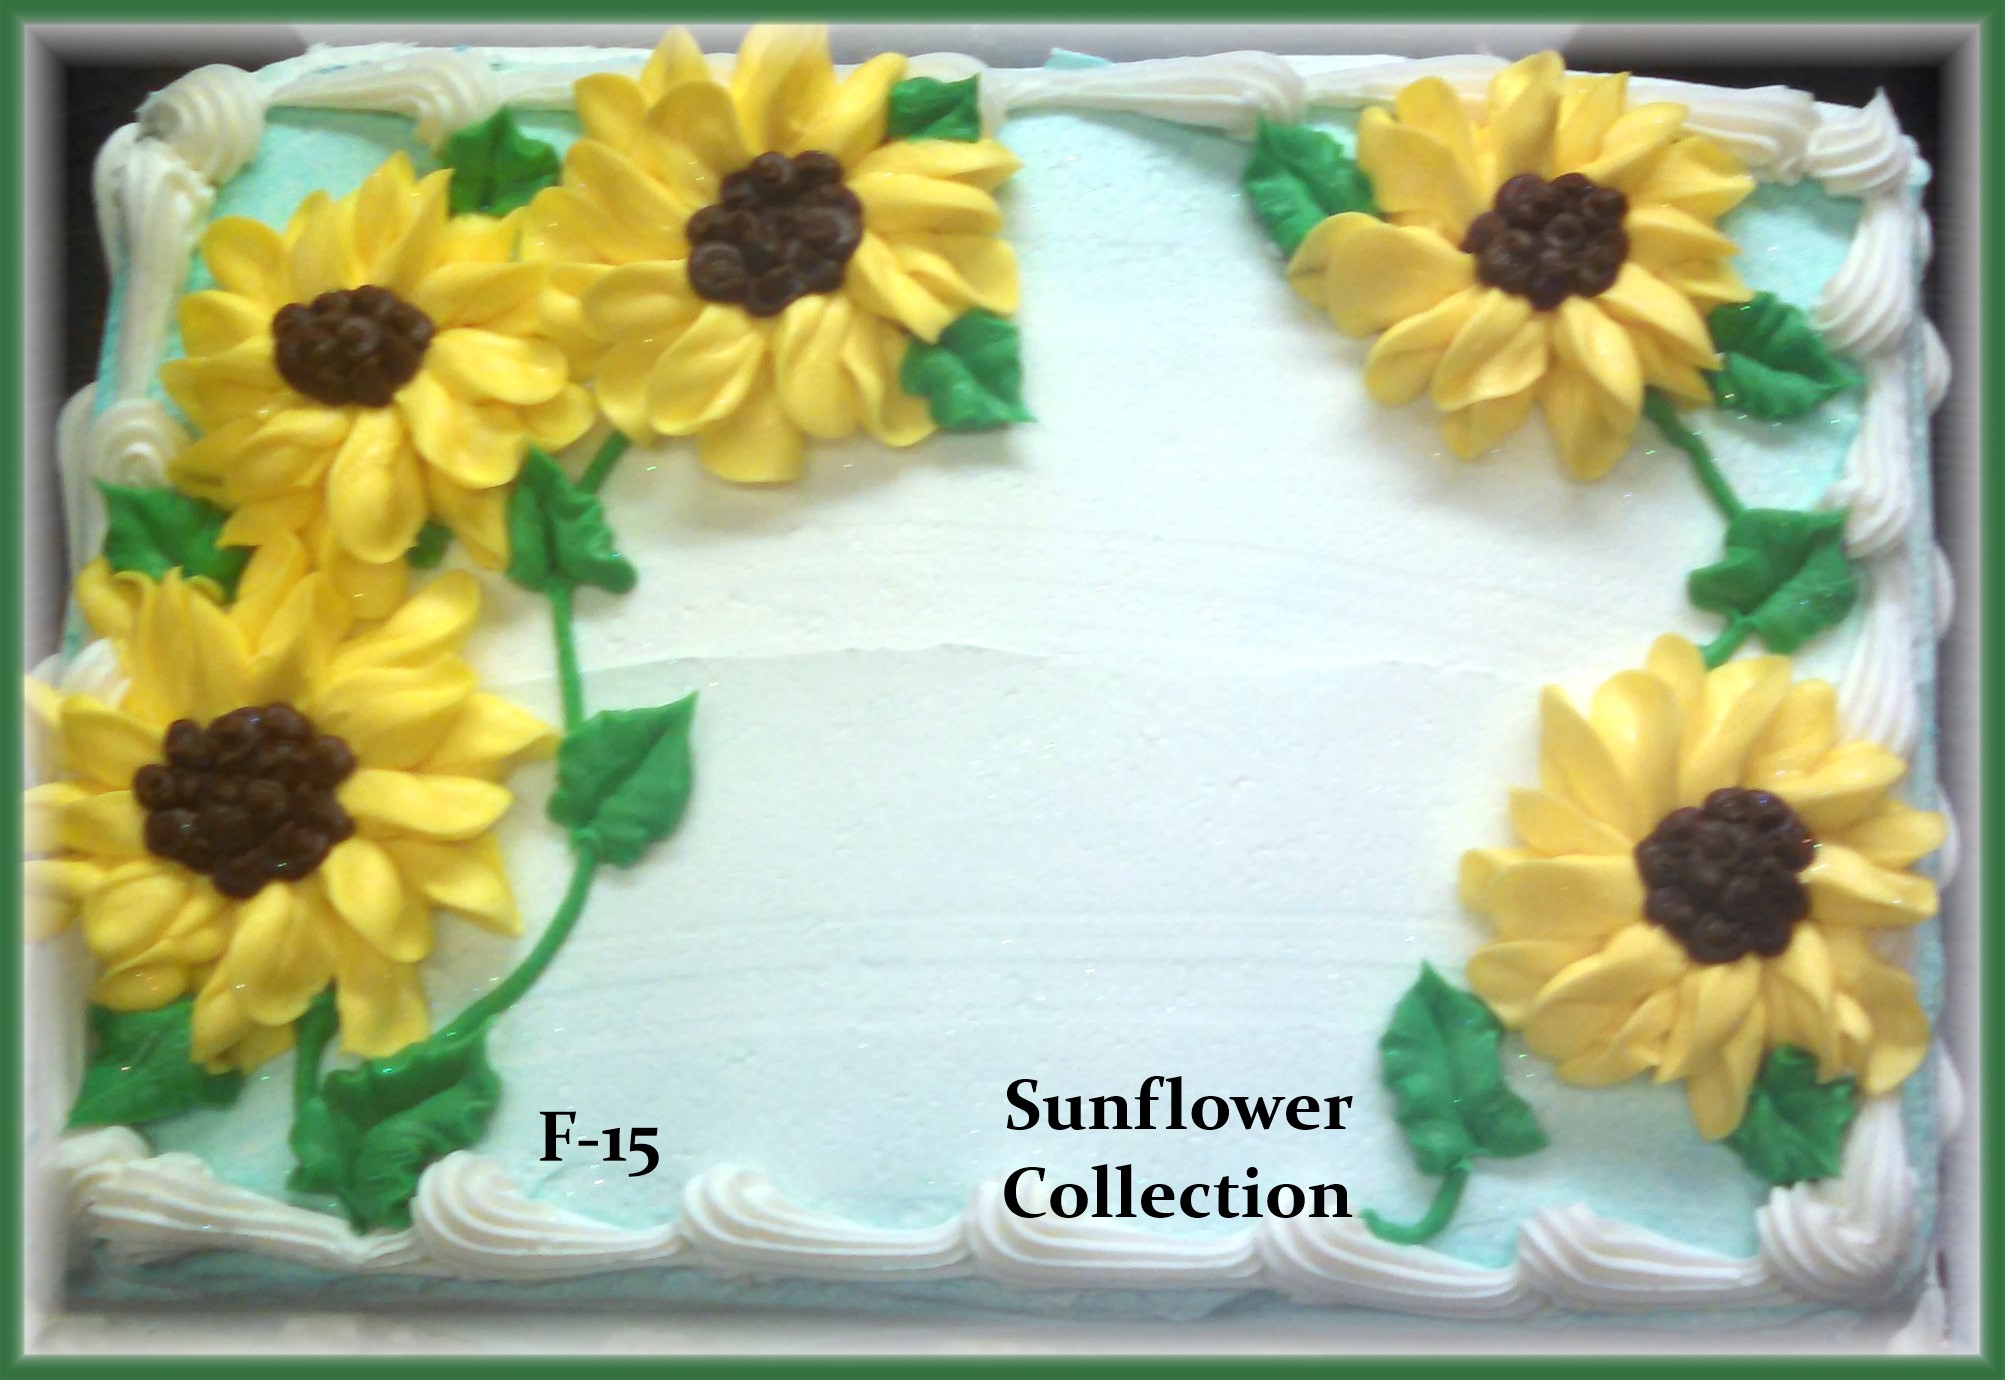 F-15 Sunflower Collection